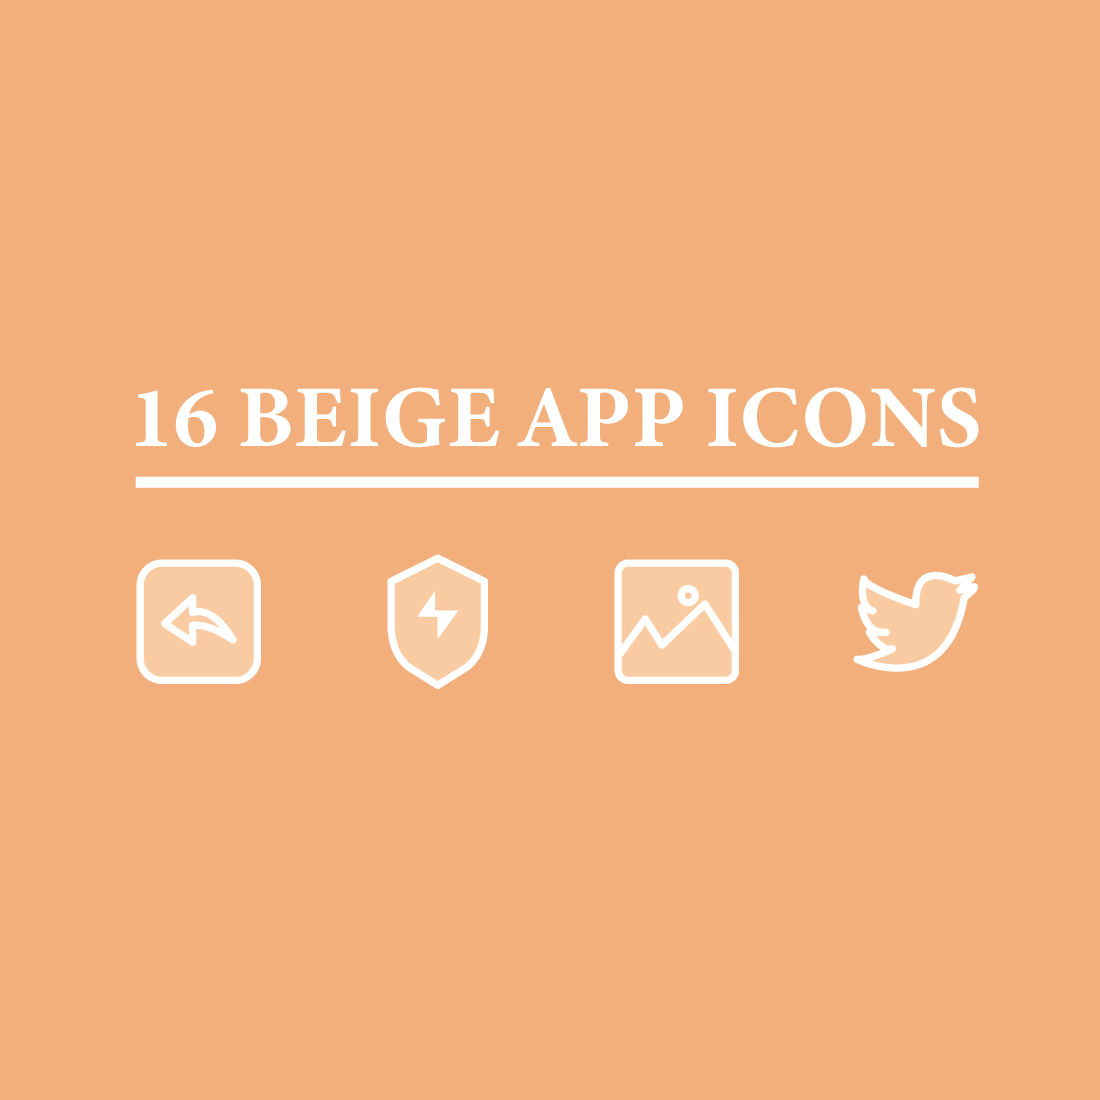 Free beige app icons main cover.